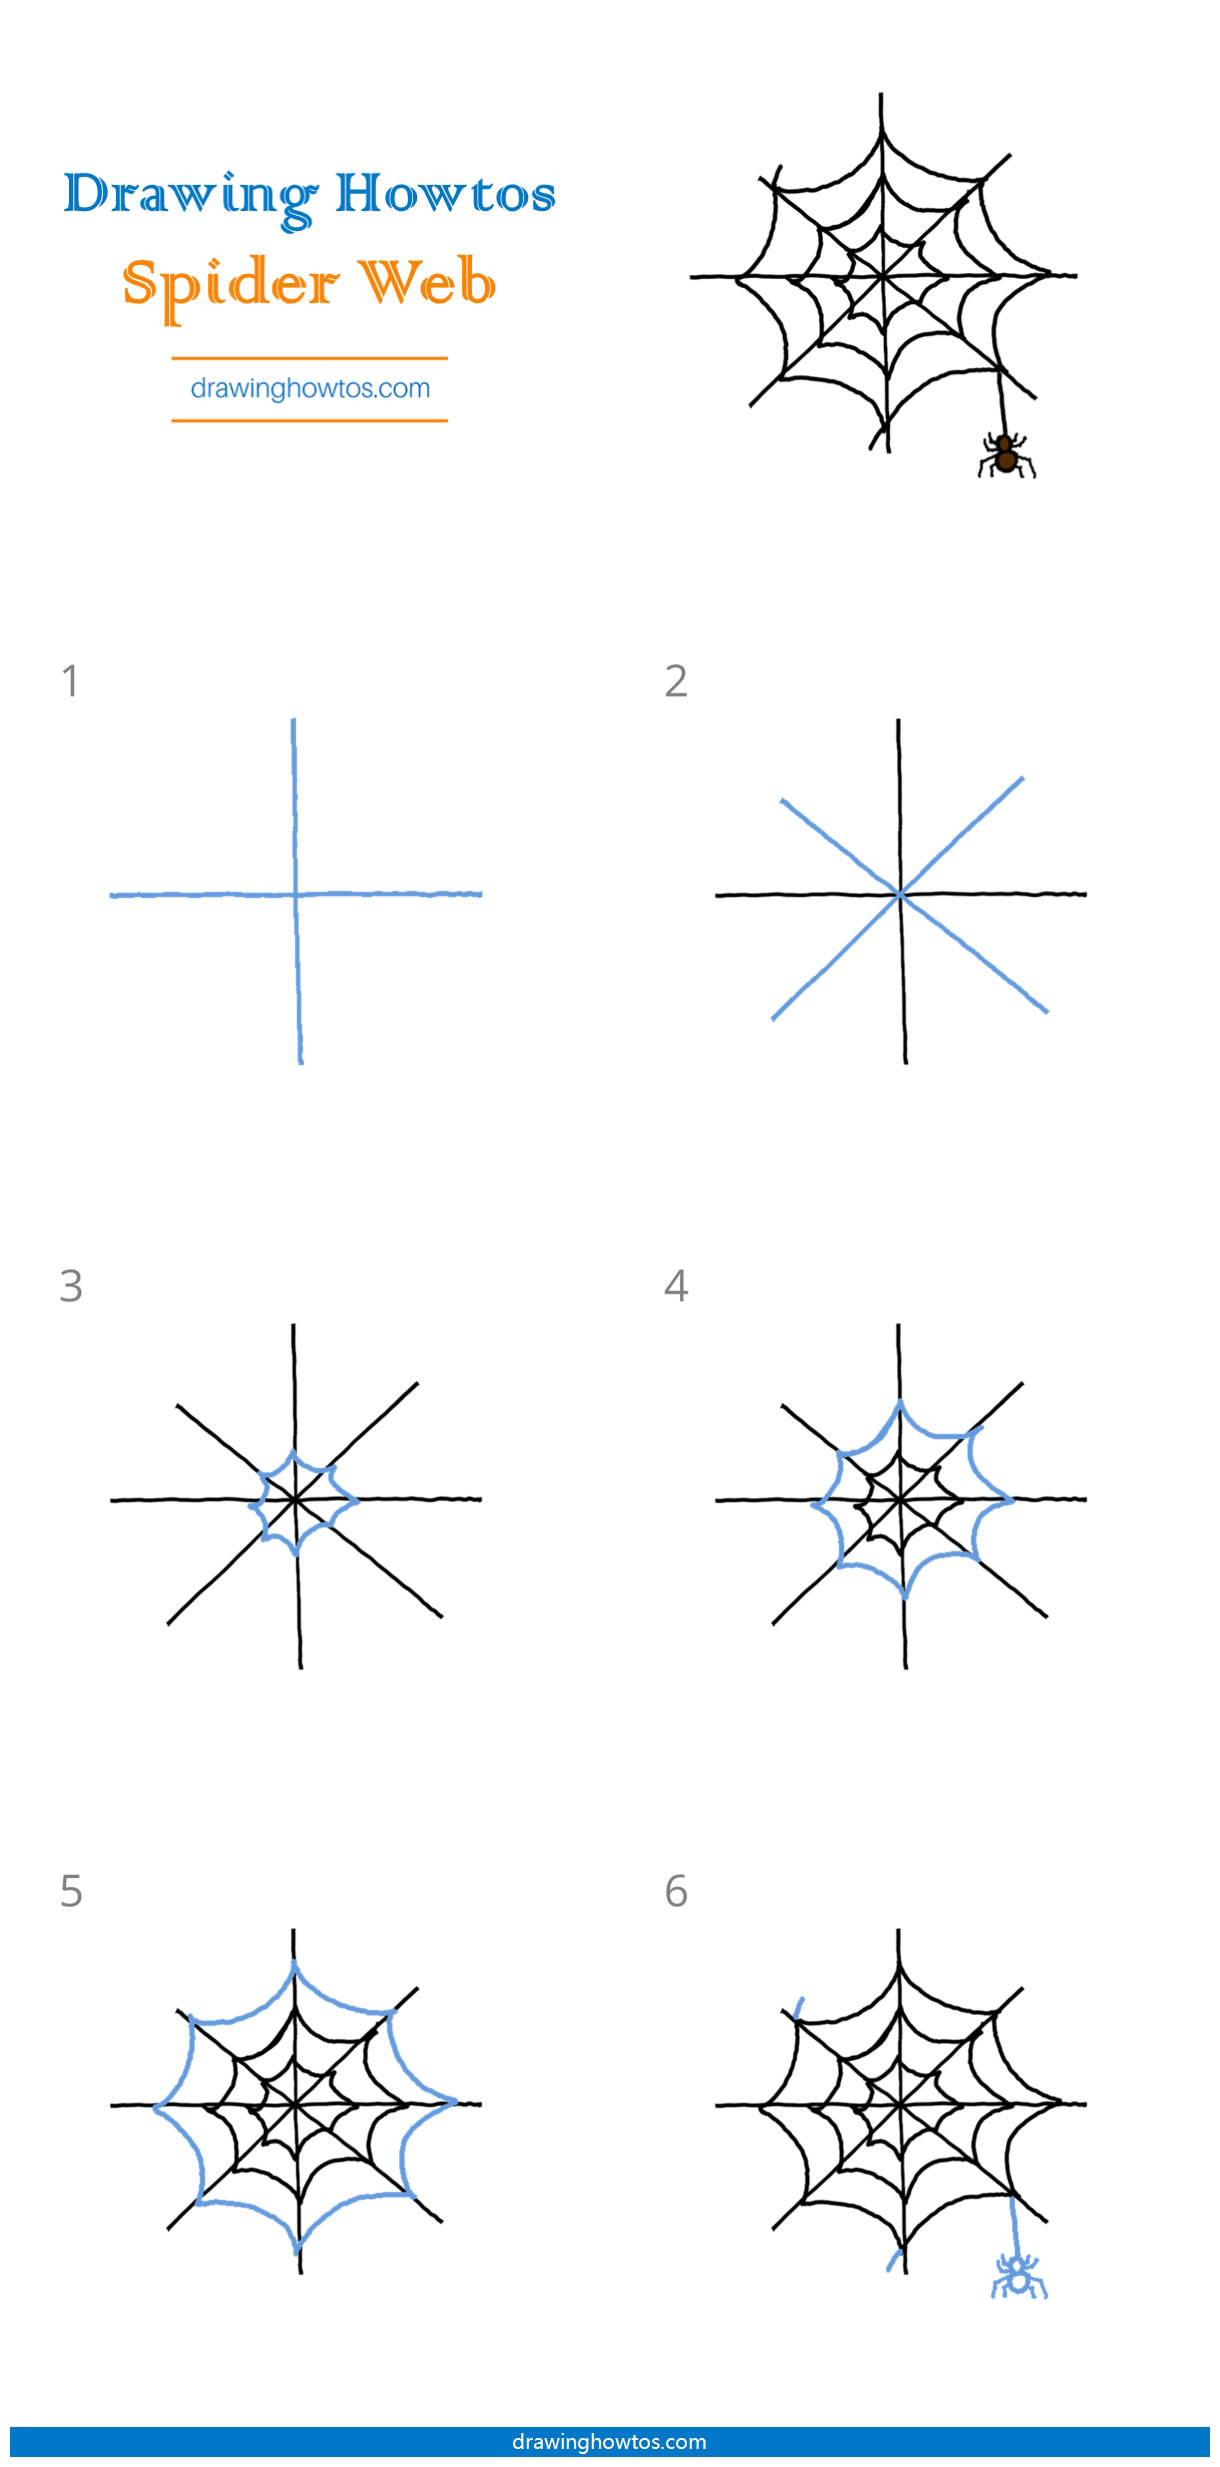 How to Draw a Spider Web Step by Step